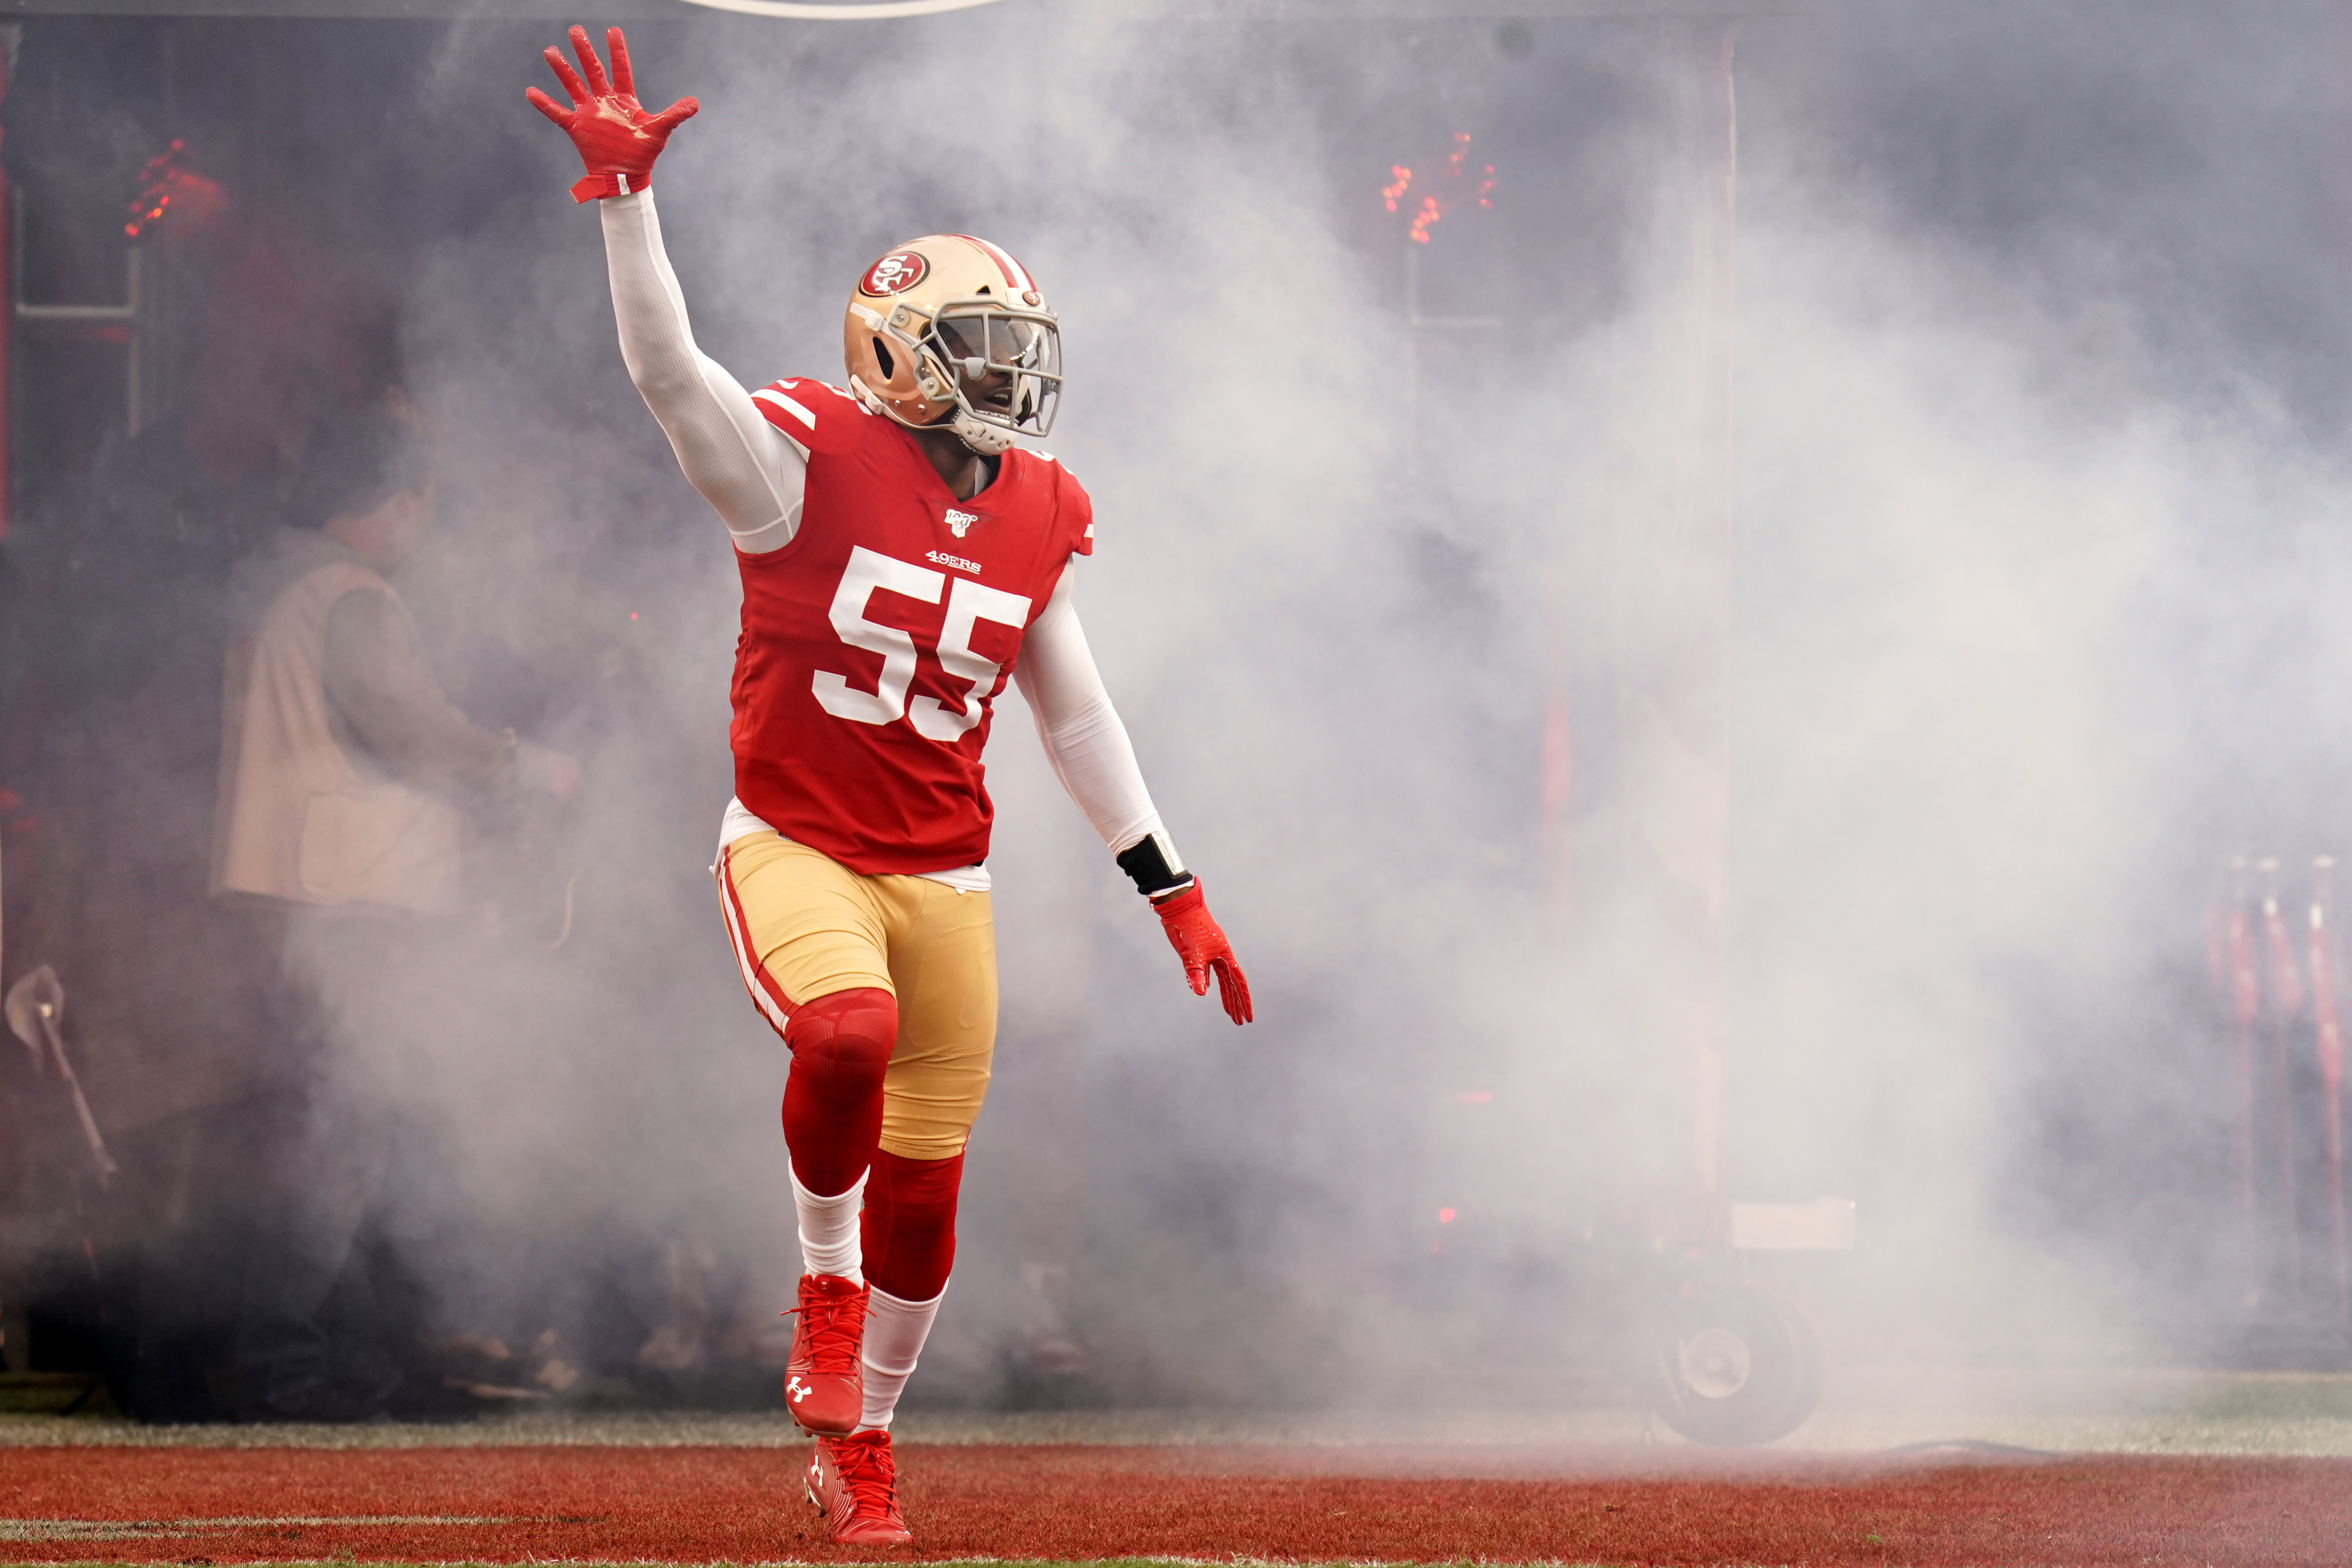 49ers defensive end Dee Ford comes out of the tunnel before a game